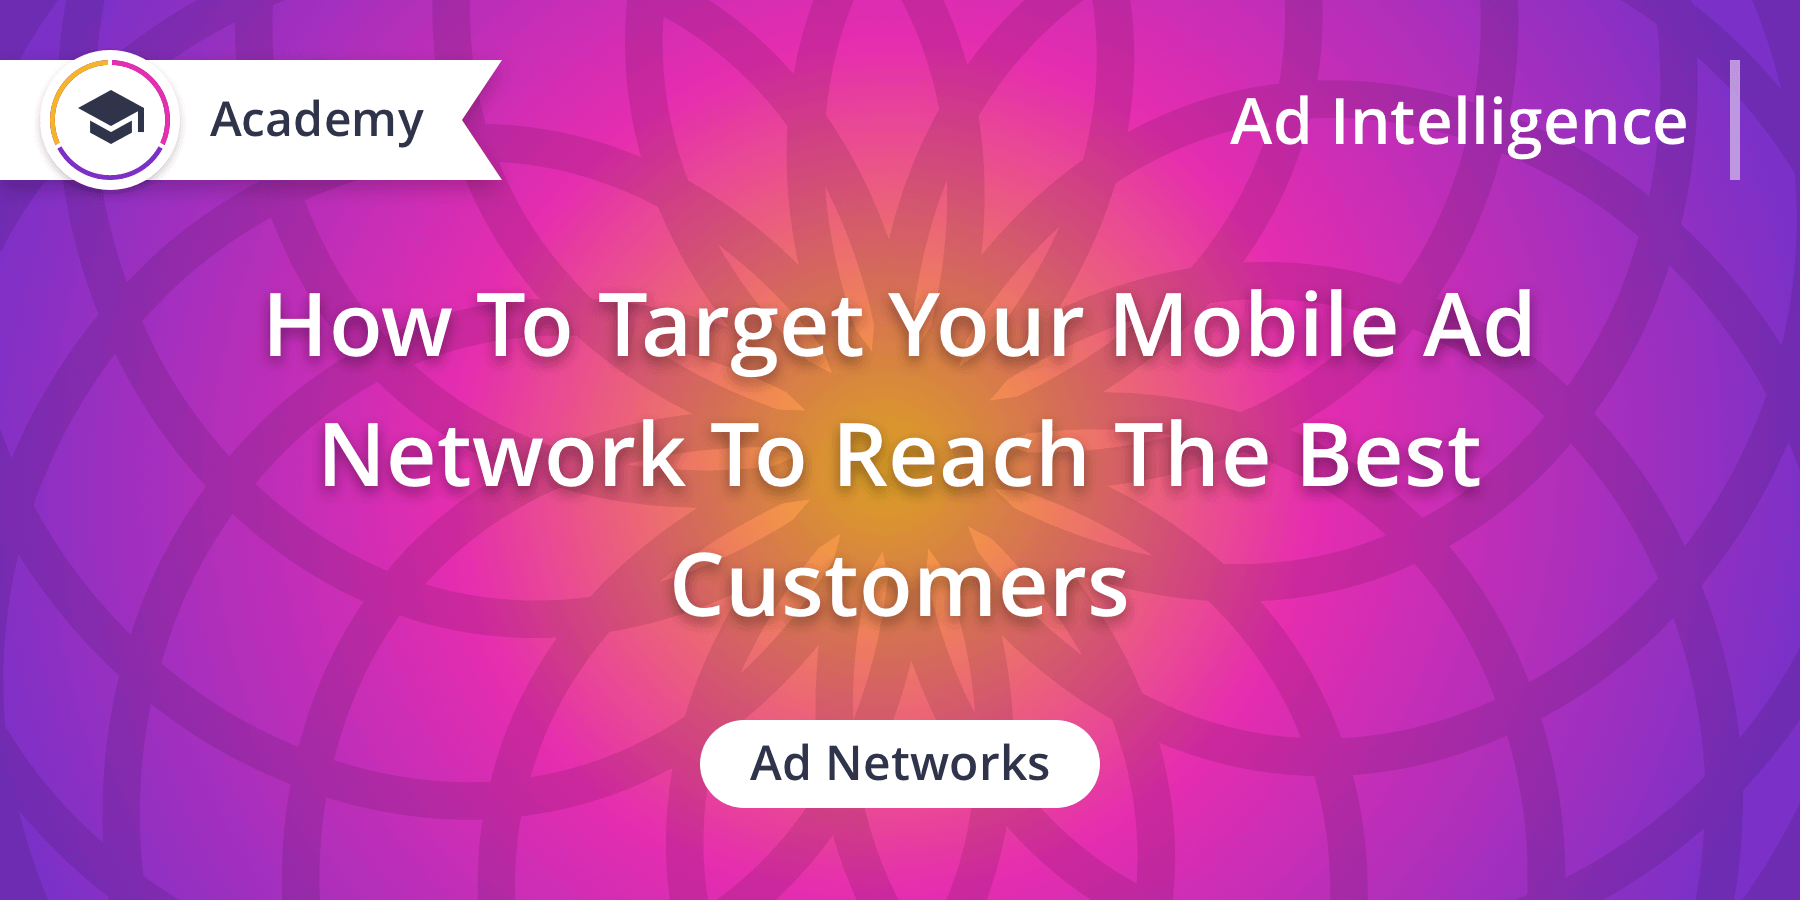 How to Target Your Mobile Ad Network to Reach the Best Customers